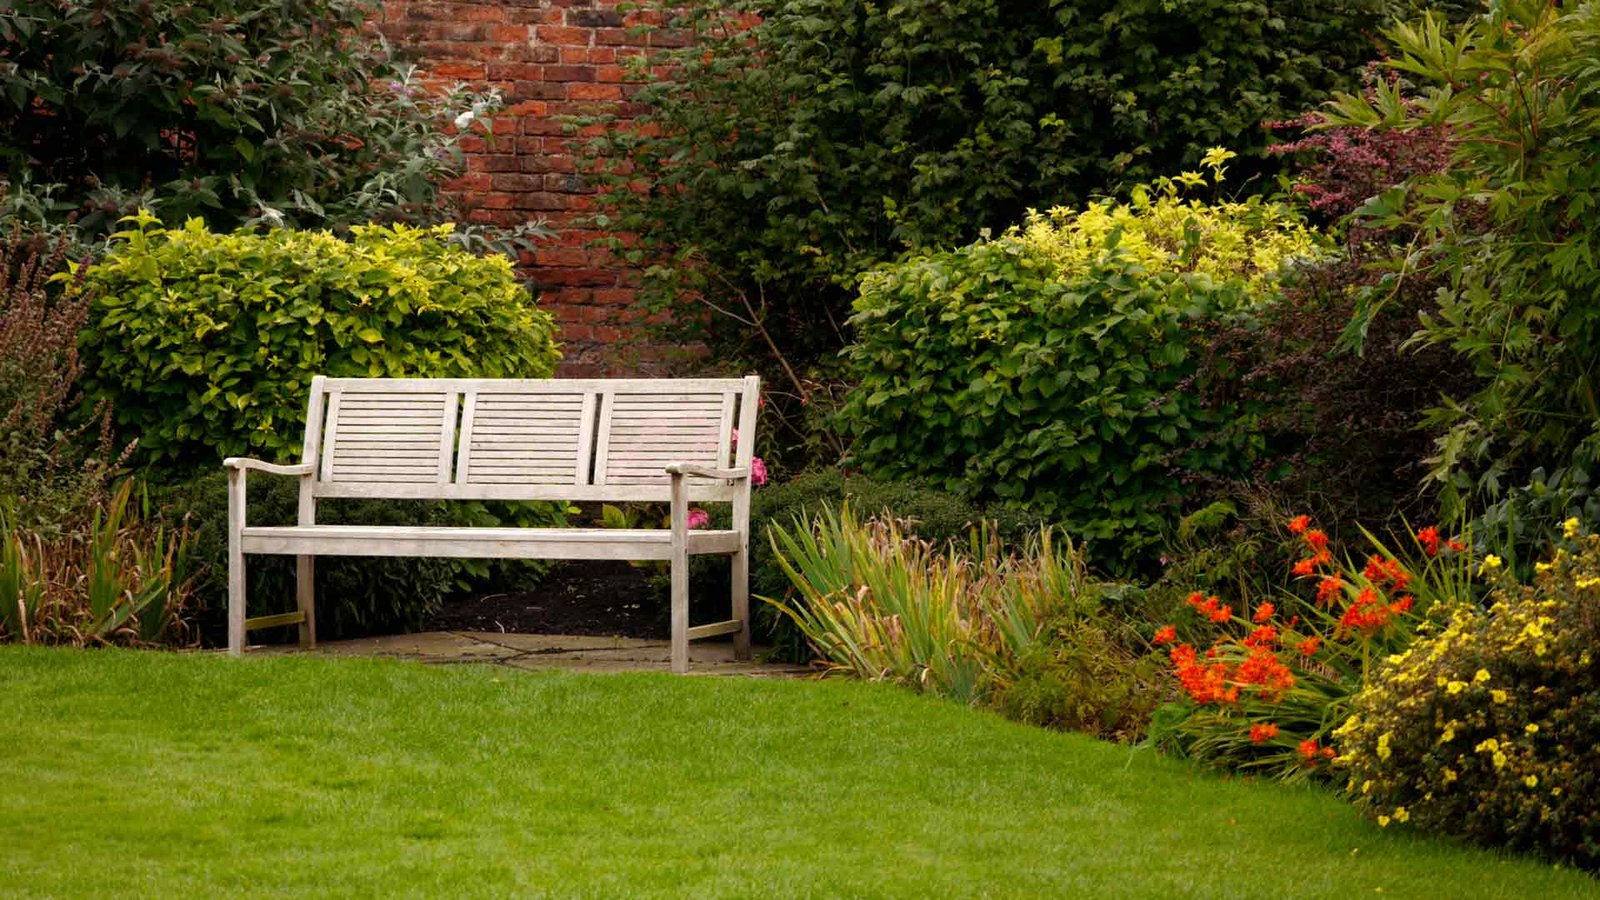 Rest And Relaxation: Embracing The Comfort Of Garden Seats